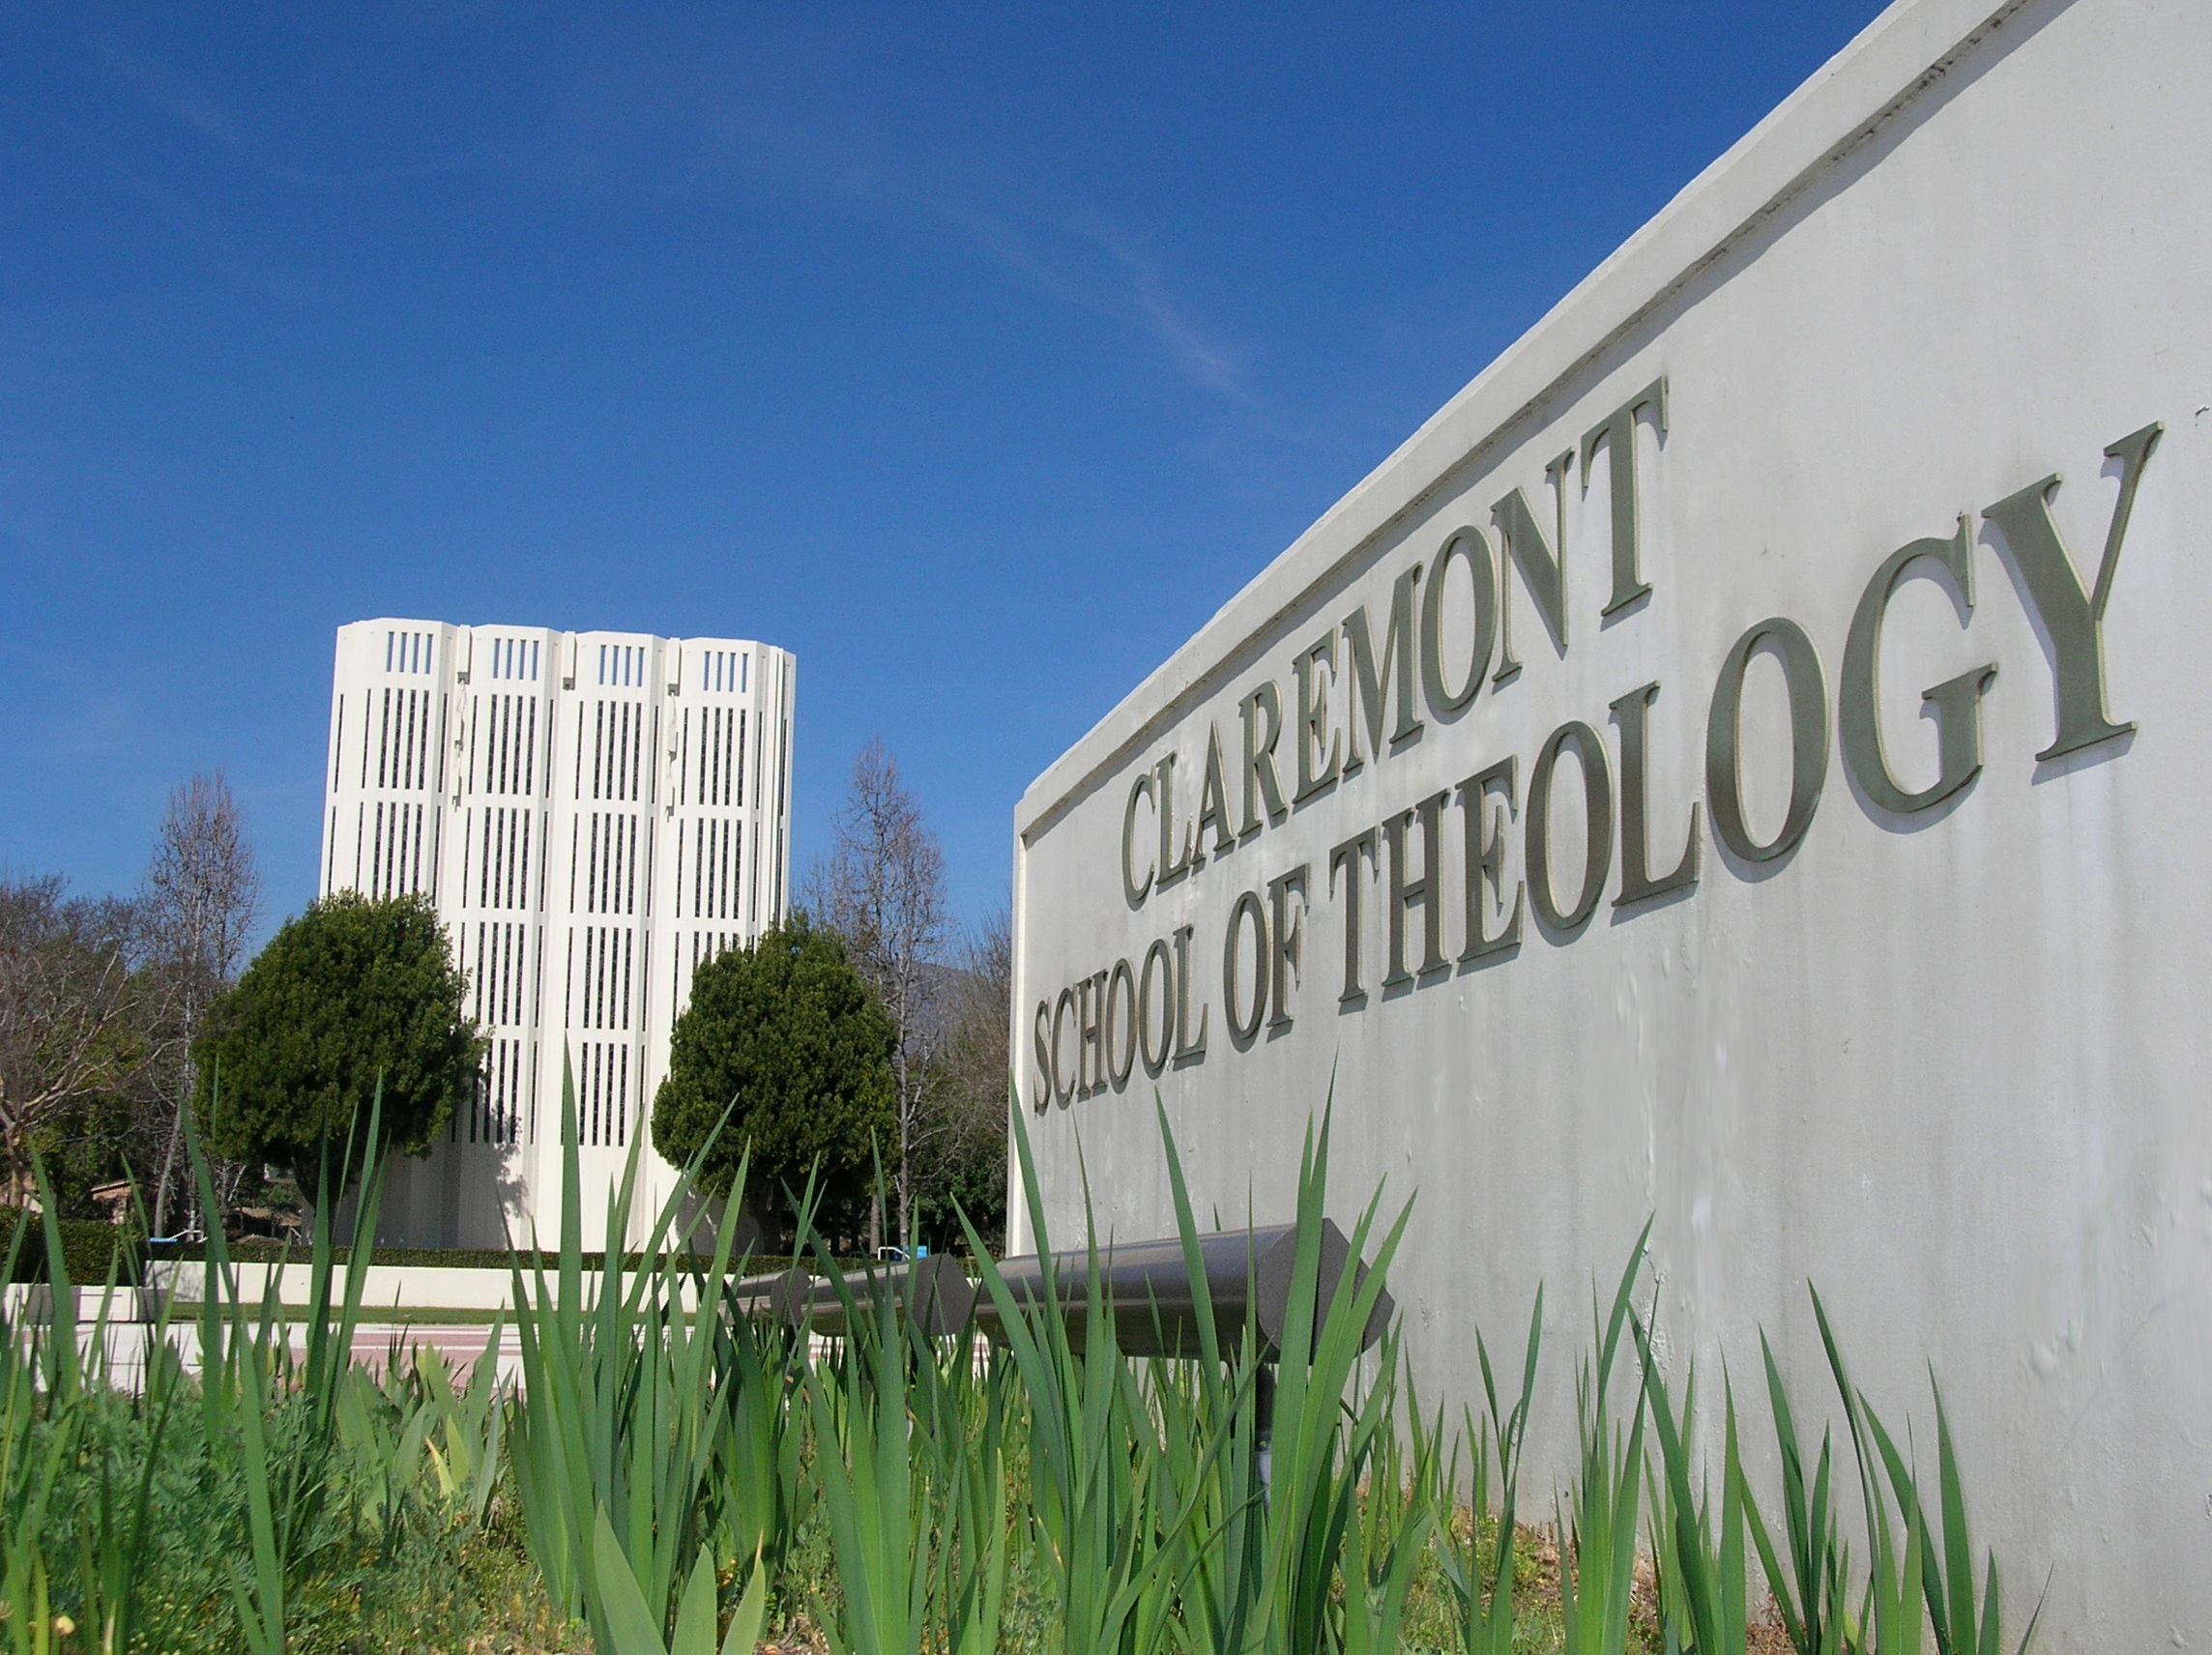 Claremont School of Theology, in Claremont, California, had been on warning status by its accrediting agency, but the warning has been removed due to improvements in enrollment, finances and other areas. The United Methodist seminary is planning a cost-saving move to Willamette University in Salem, Oregon. Photo courtesy of Claremont School of Theology.